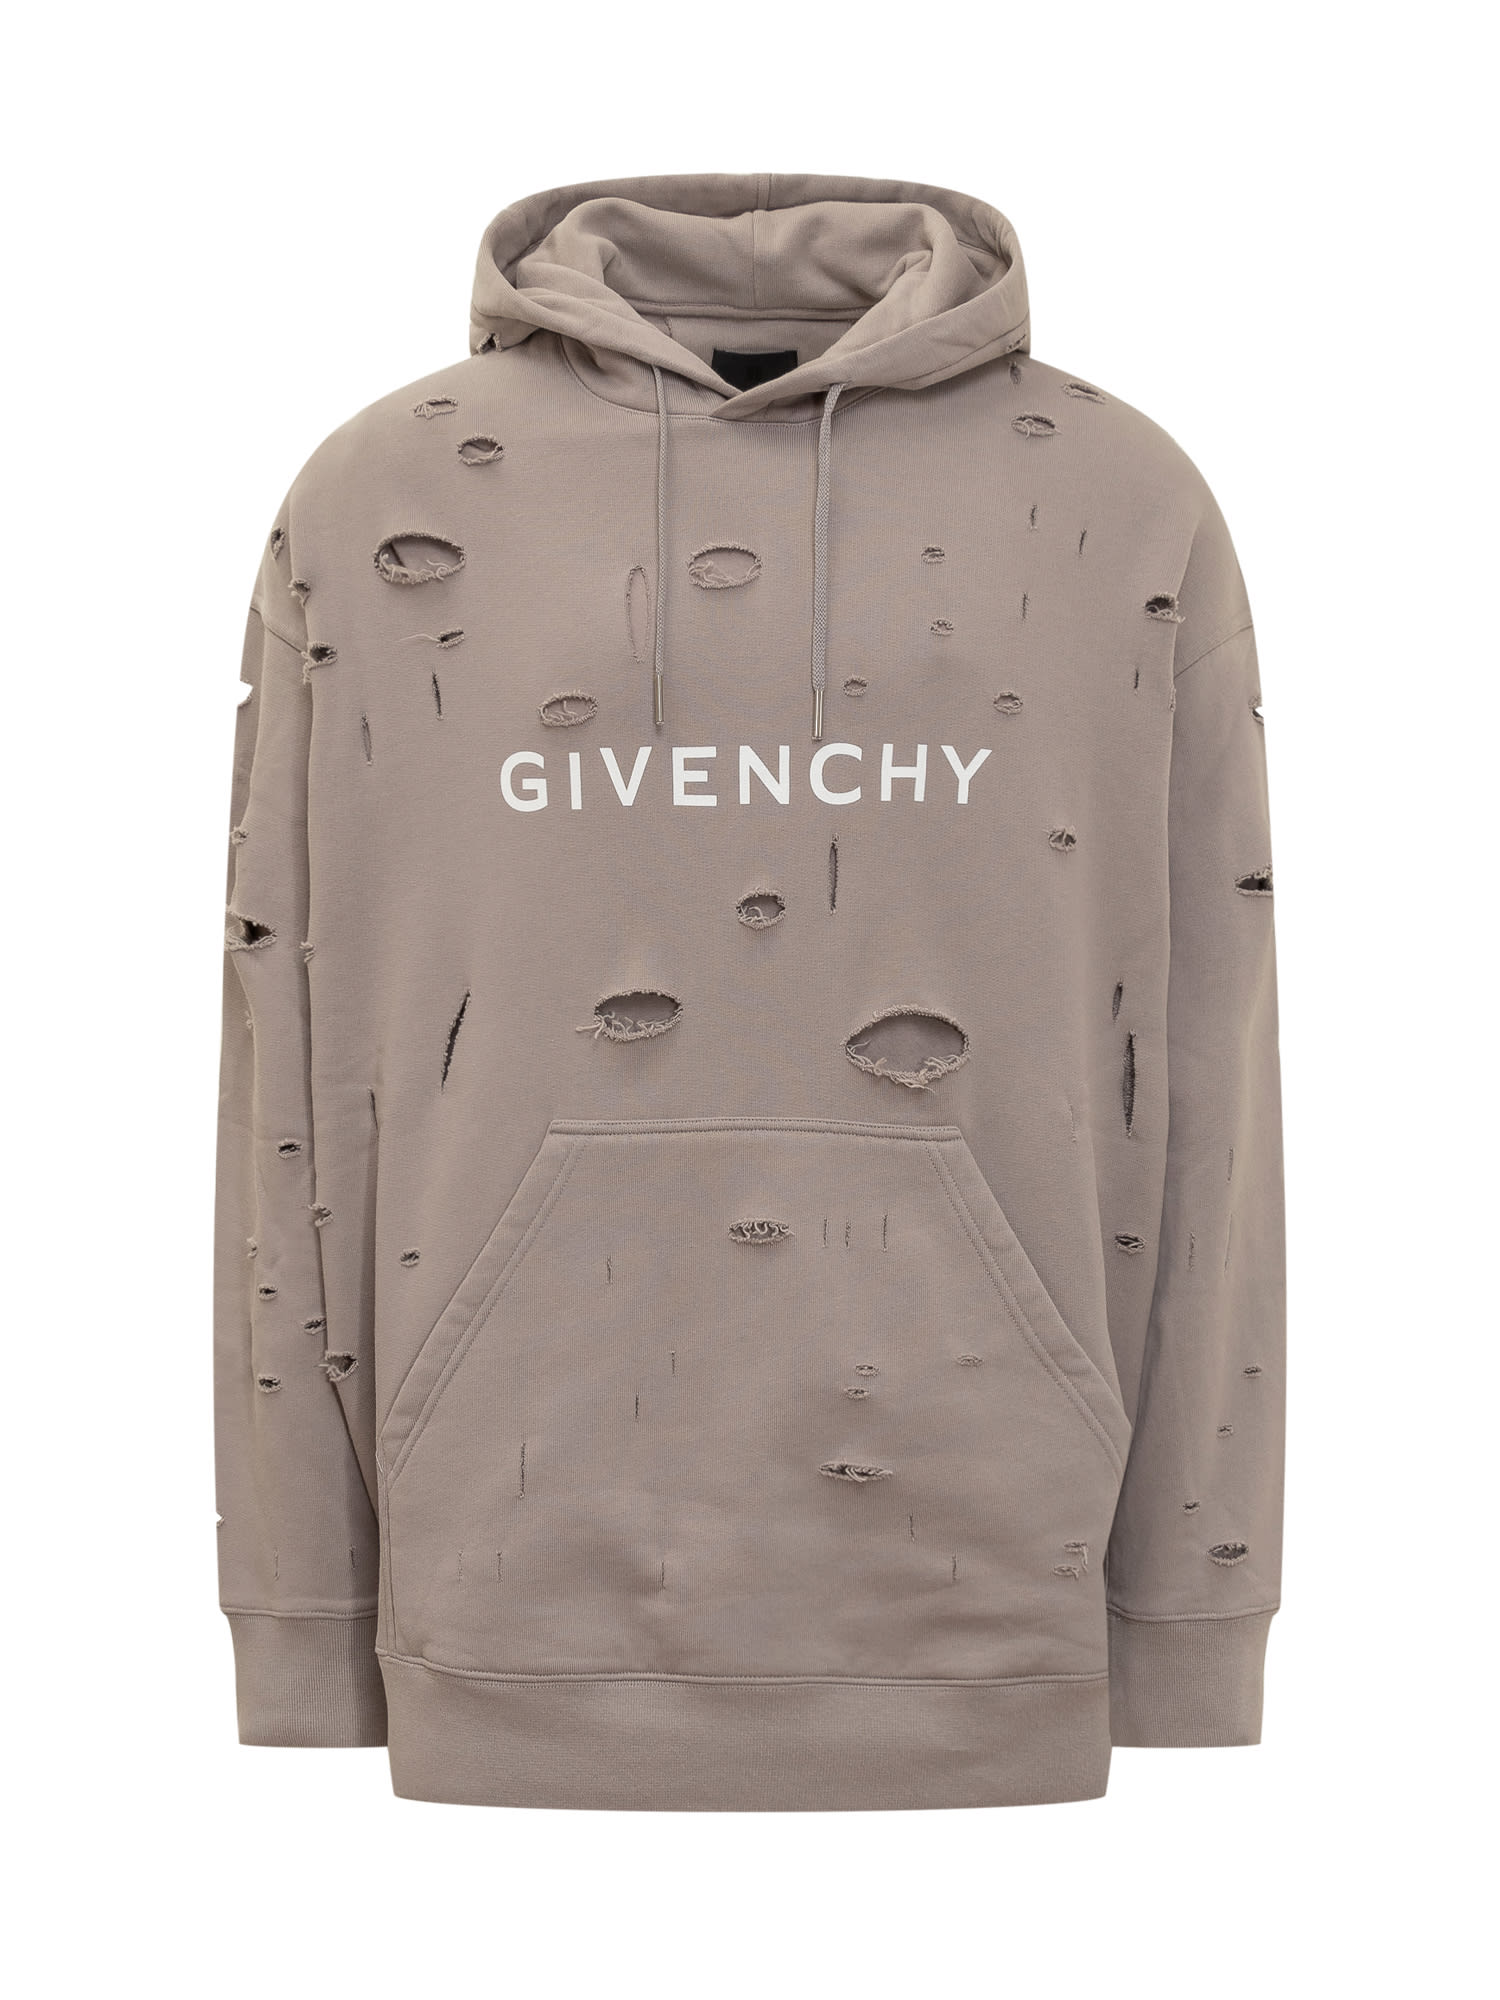 Givenchy Sweatshirt In Ripped Gauze Fabric In Taupe